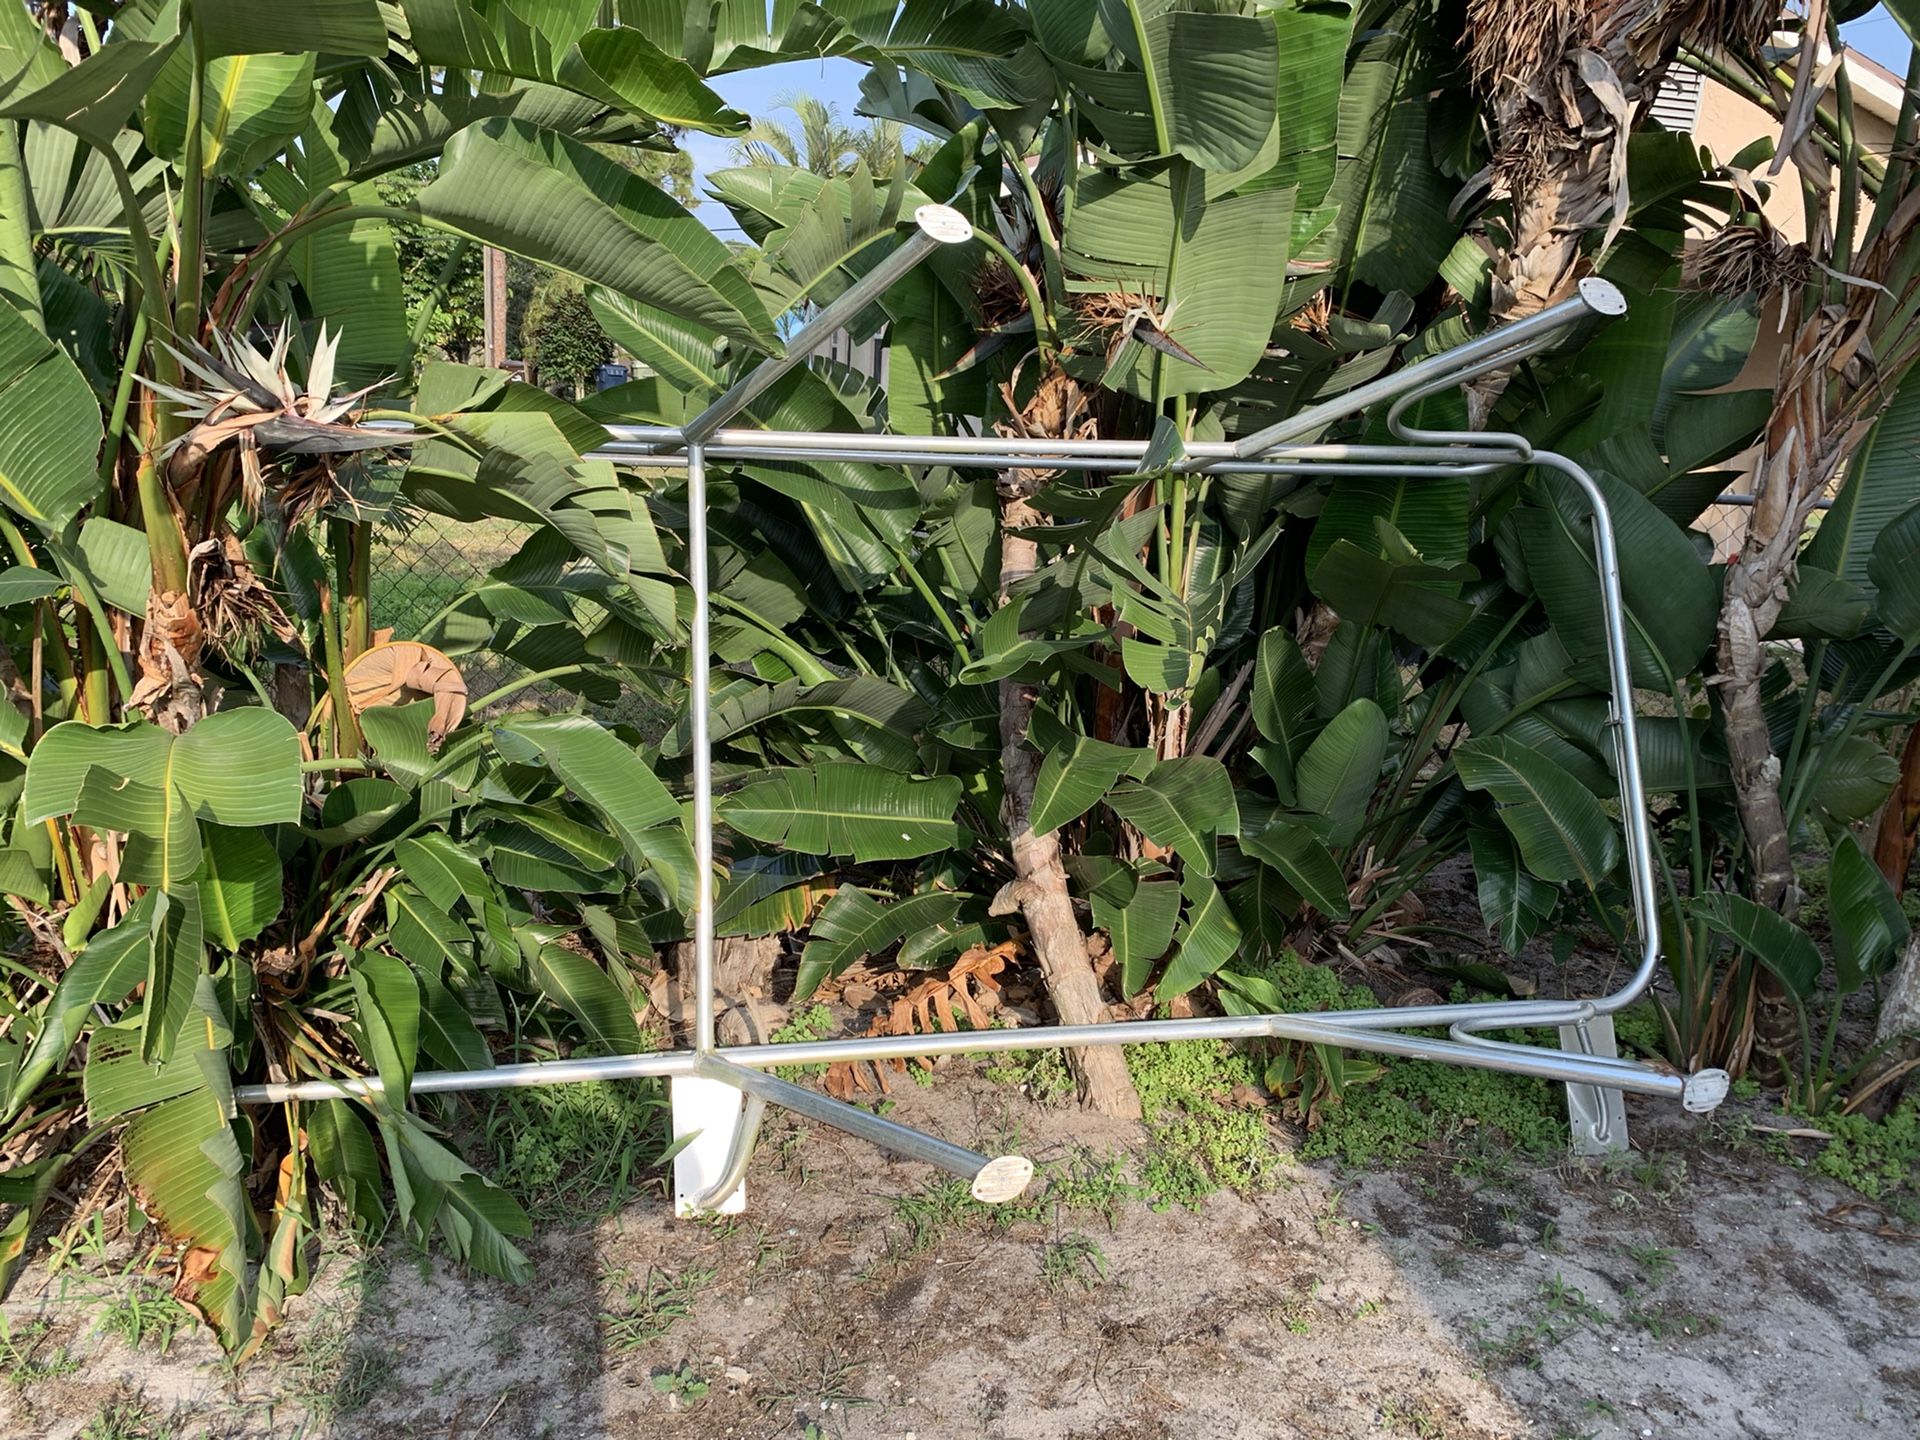 Ladder rack. Came off of a 2003 F150 Ford $250.00 is aluminum frame.